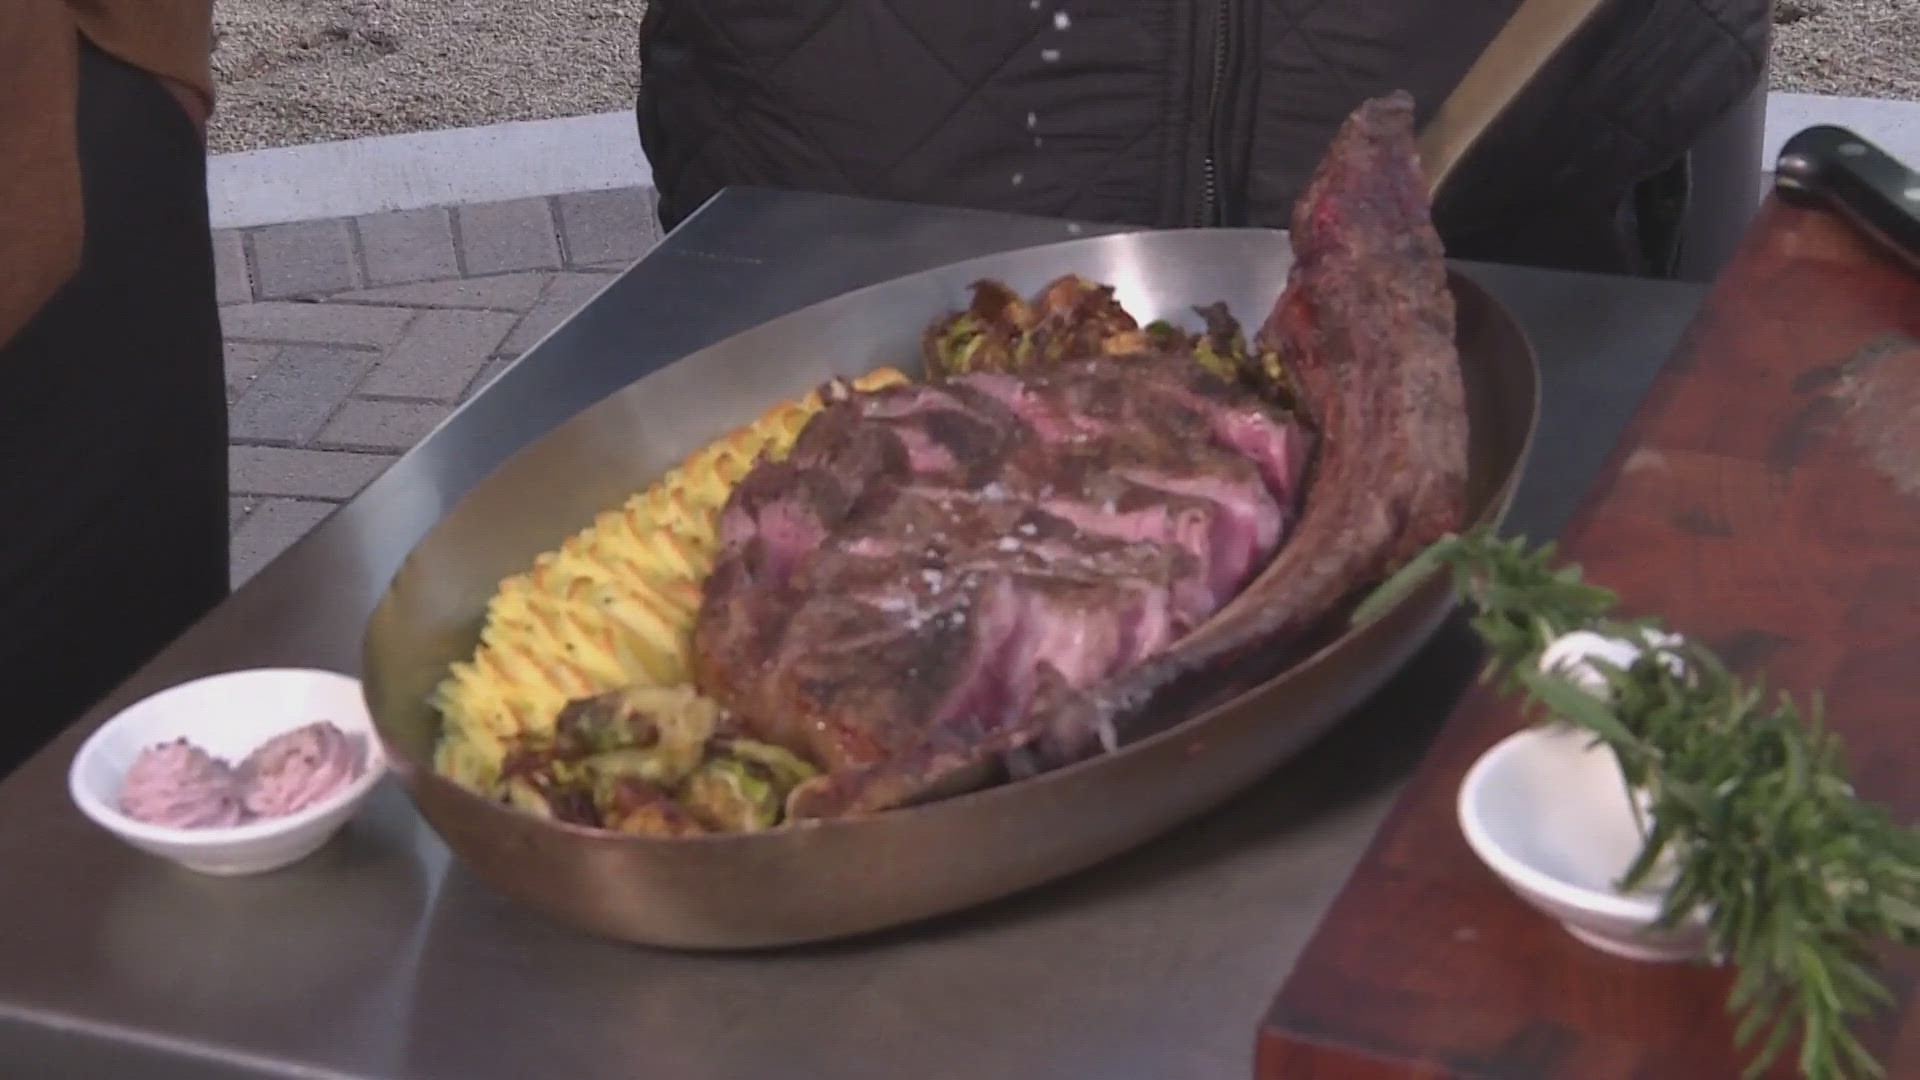 The WM Phoenix Open is anything but boring for food lovers. We asked a chef to show us a Tomahawk steak.